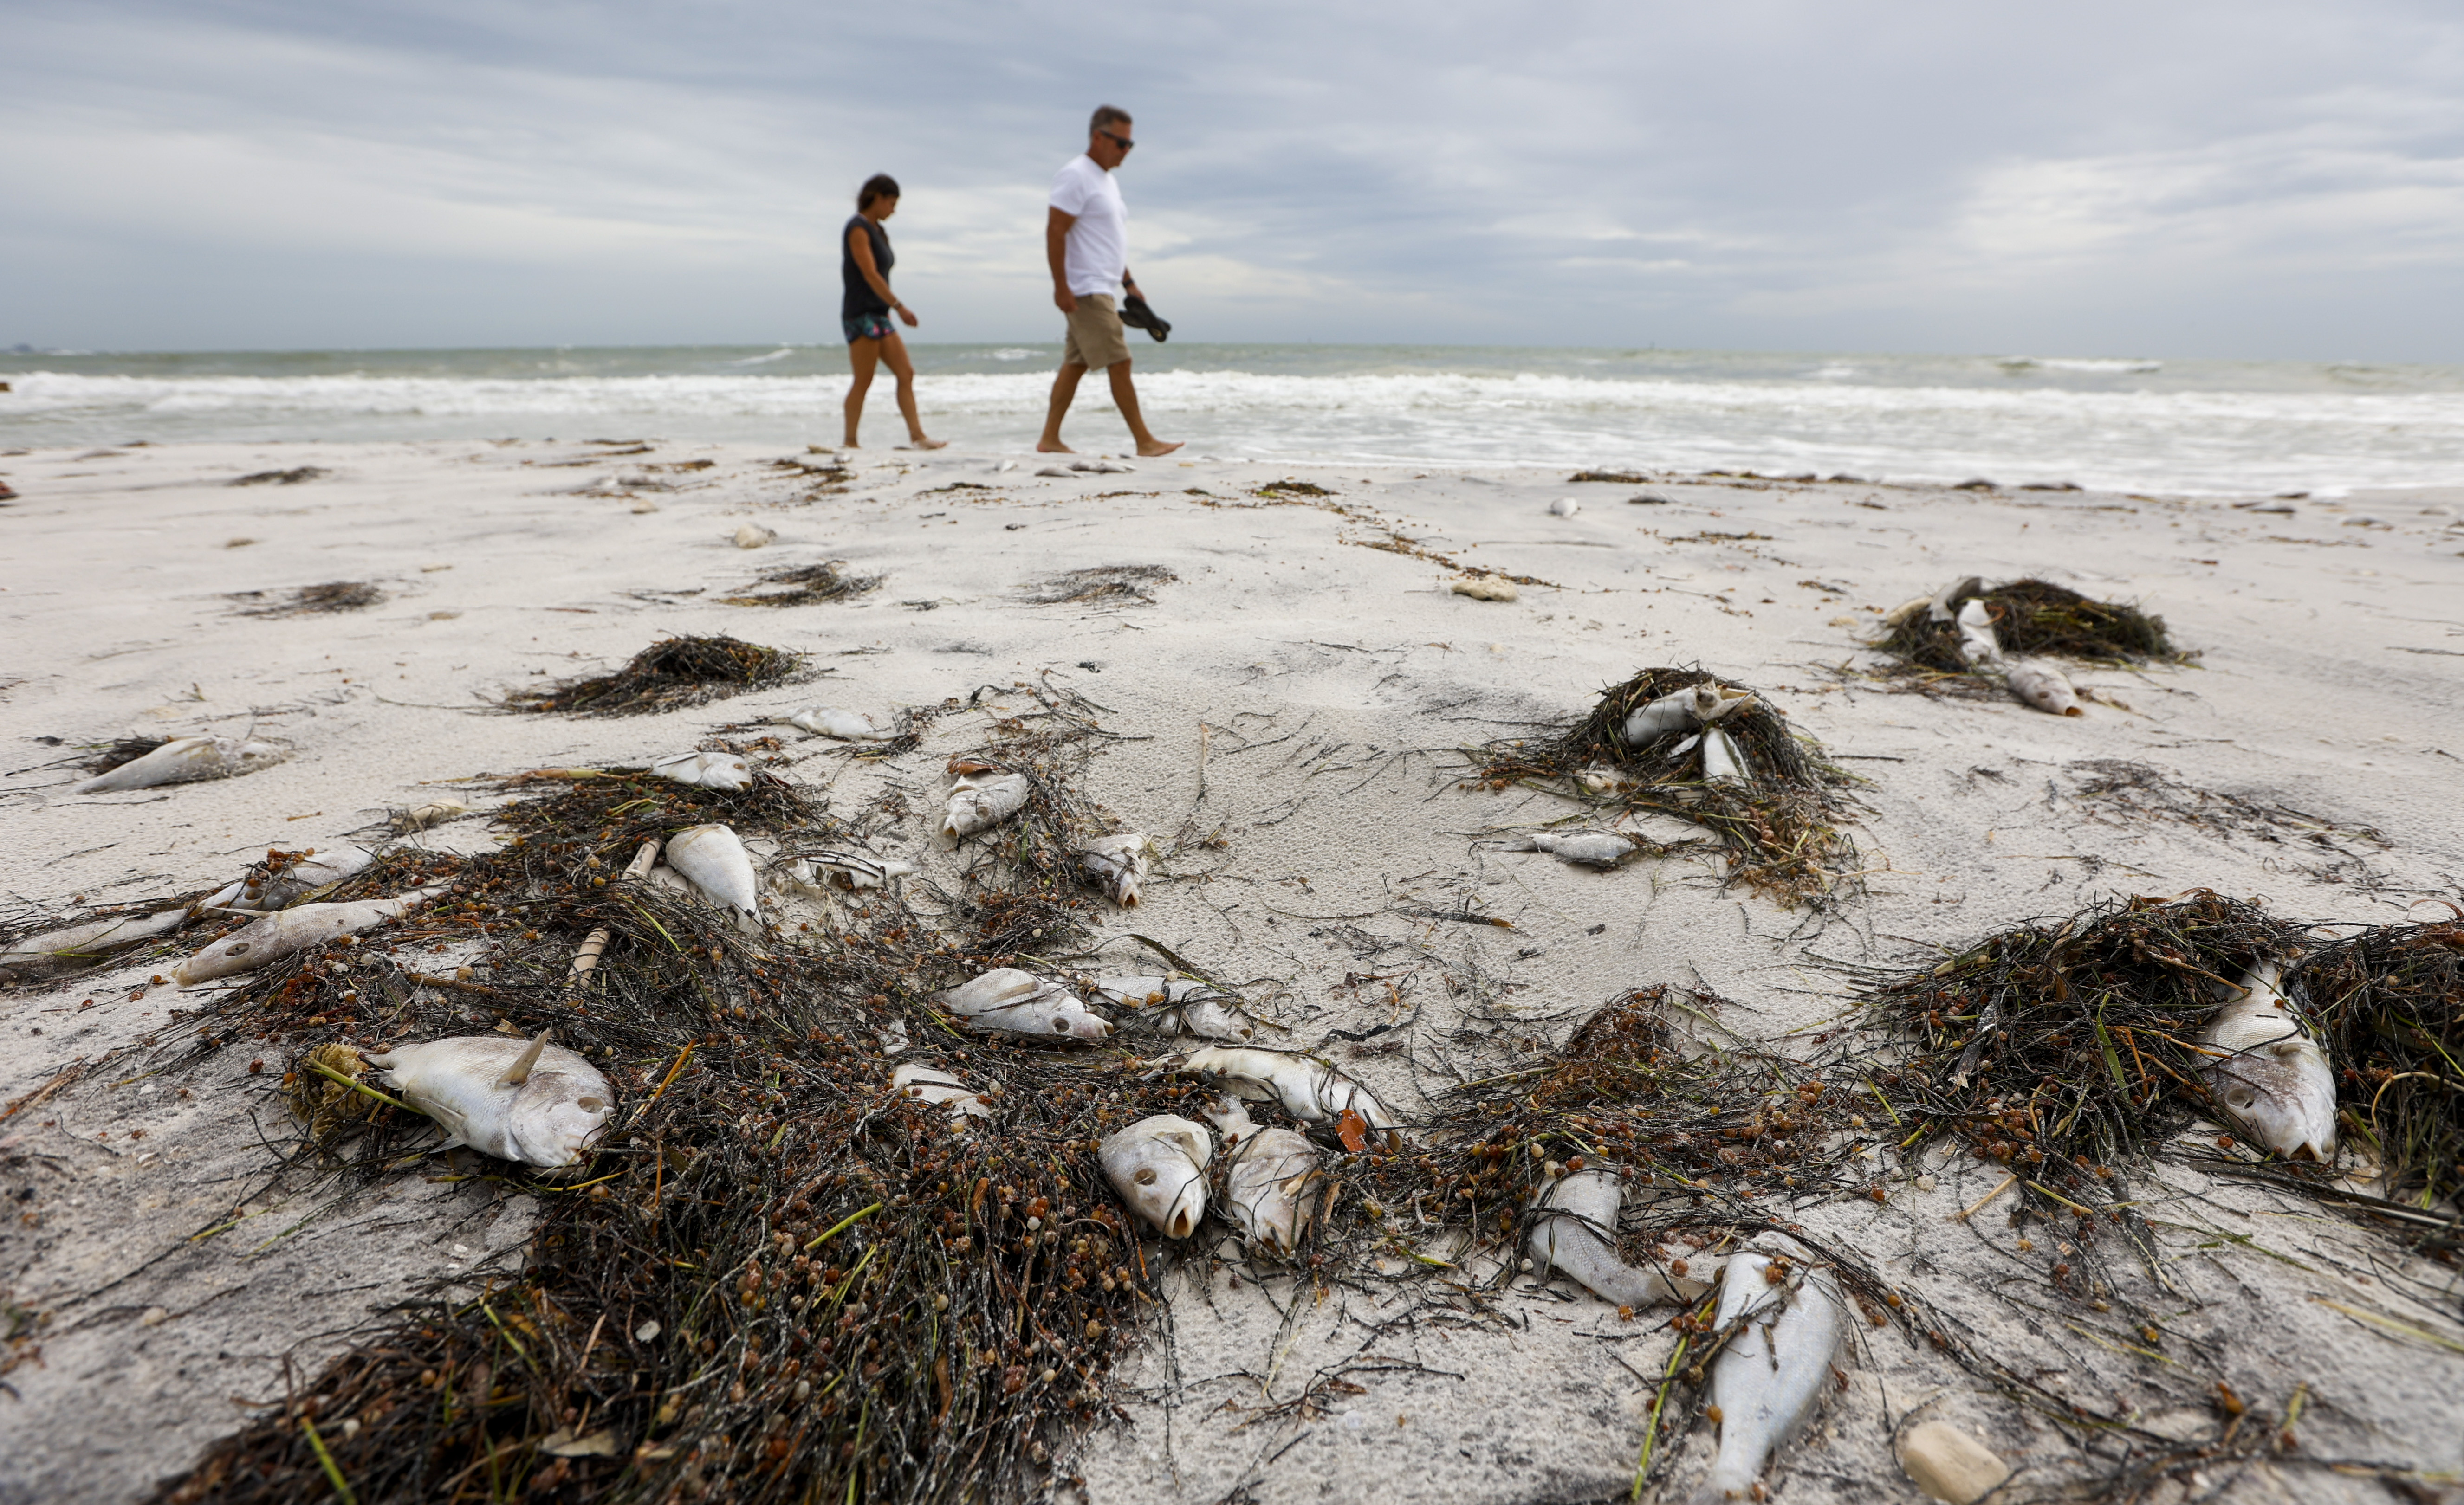 A foul task: They pick up Florida's red tide corpses